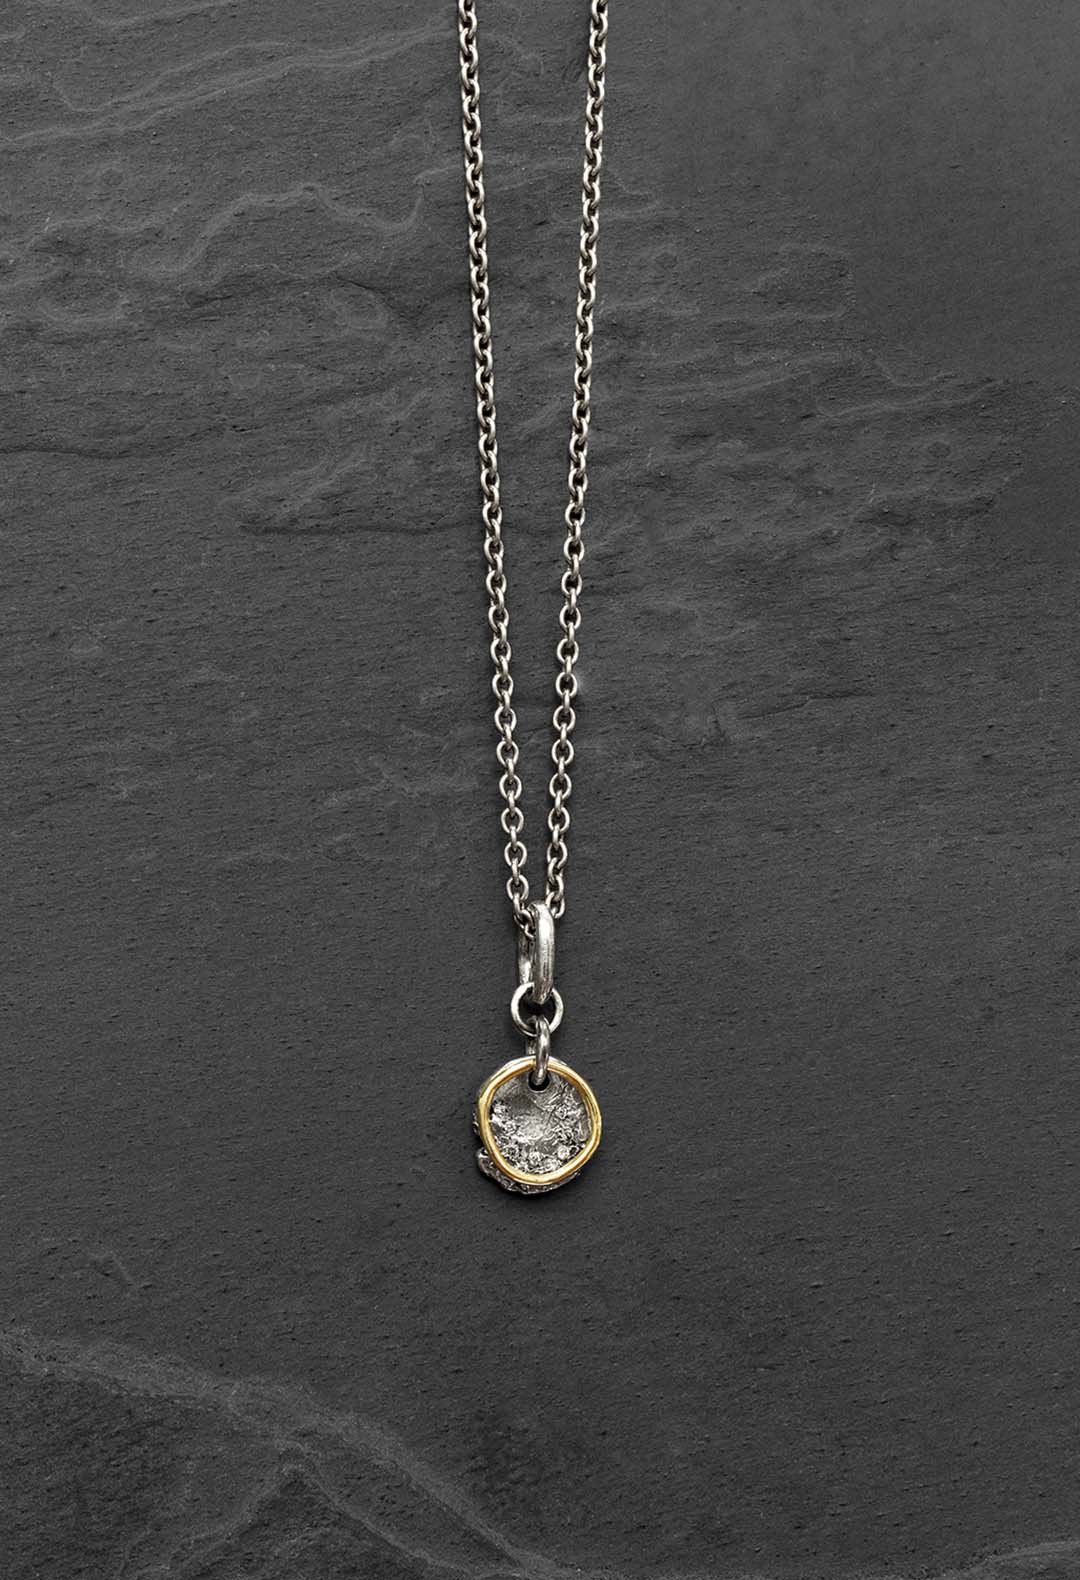 Pendent gold ring necklace